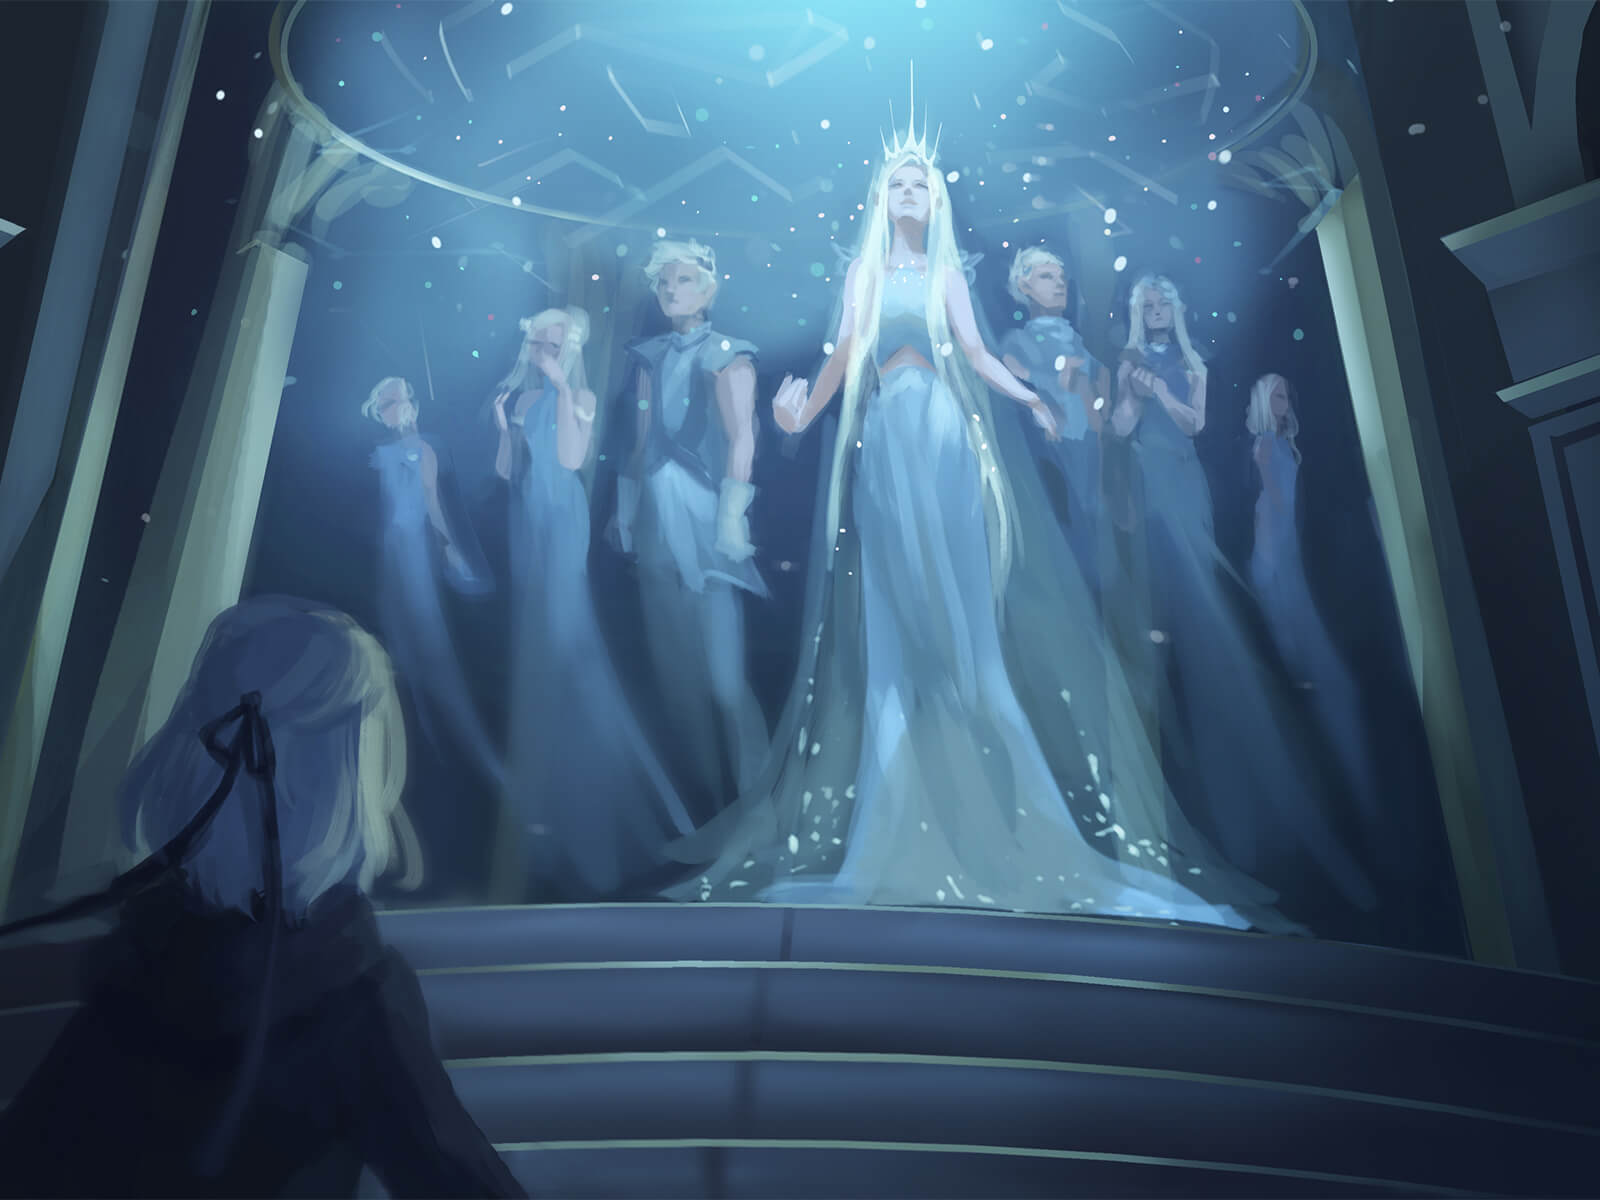 A girl looks up at a queen with long blonde hair and a sparkling gown